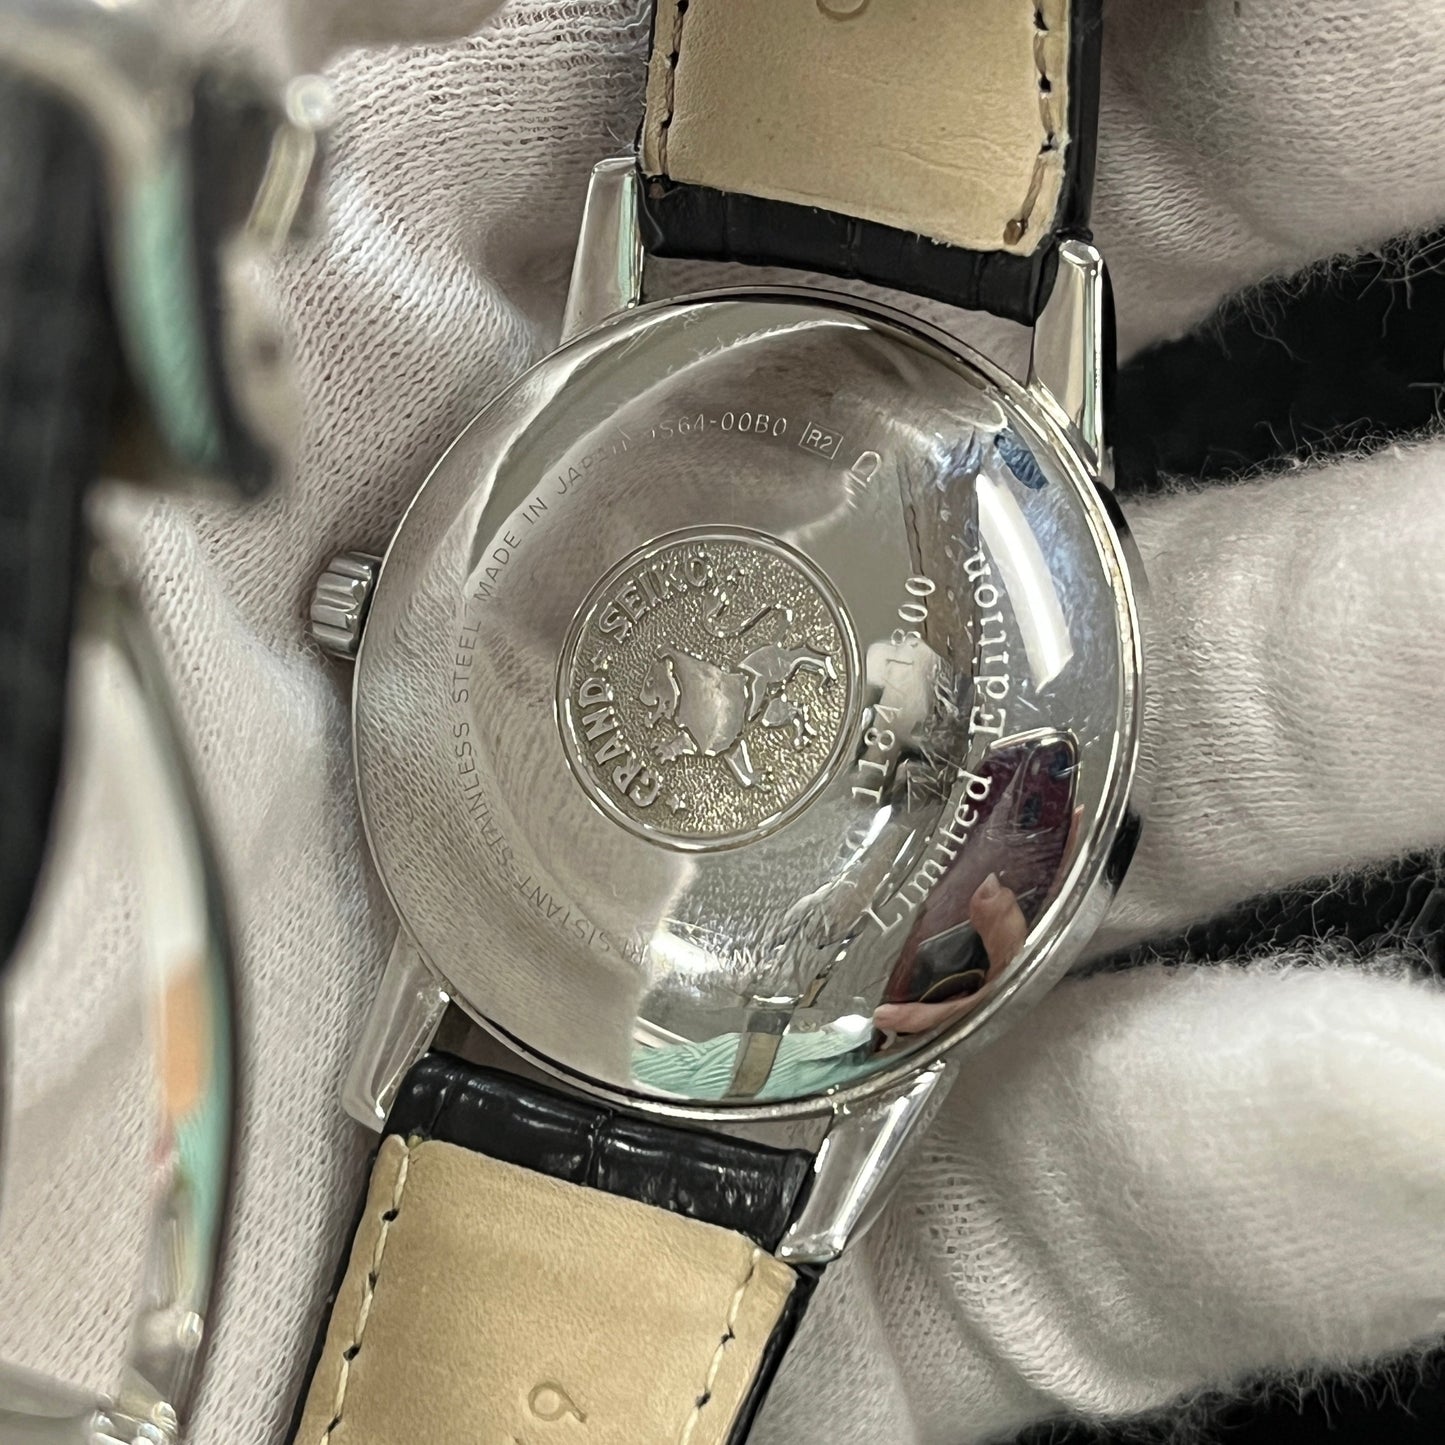 SBGW033　Grand Seiko 130th anniversary Limited Edition of 1300　2GSE01-00098